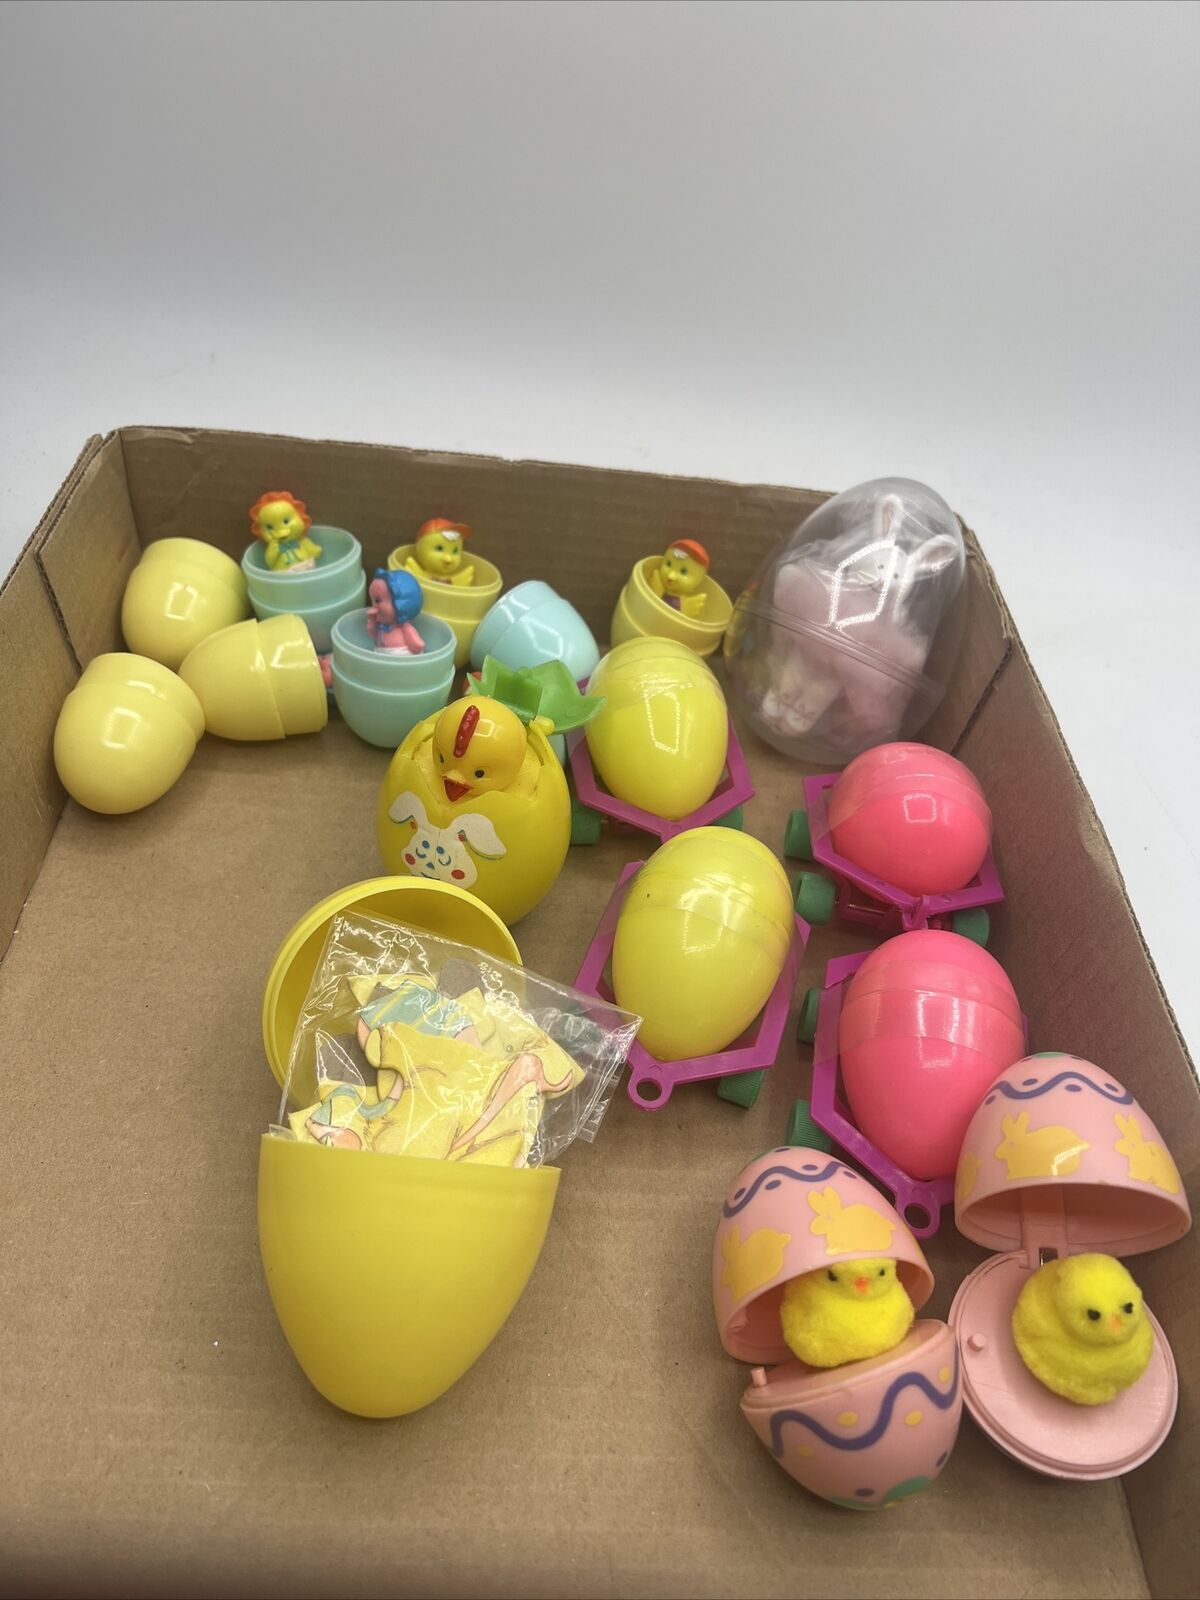 Vintage Plastic Easter Toy Egg Lot Chick Figures Treats Wagons Puzzle Imperial